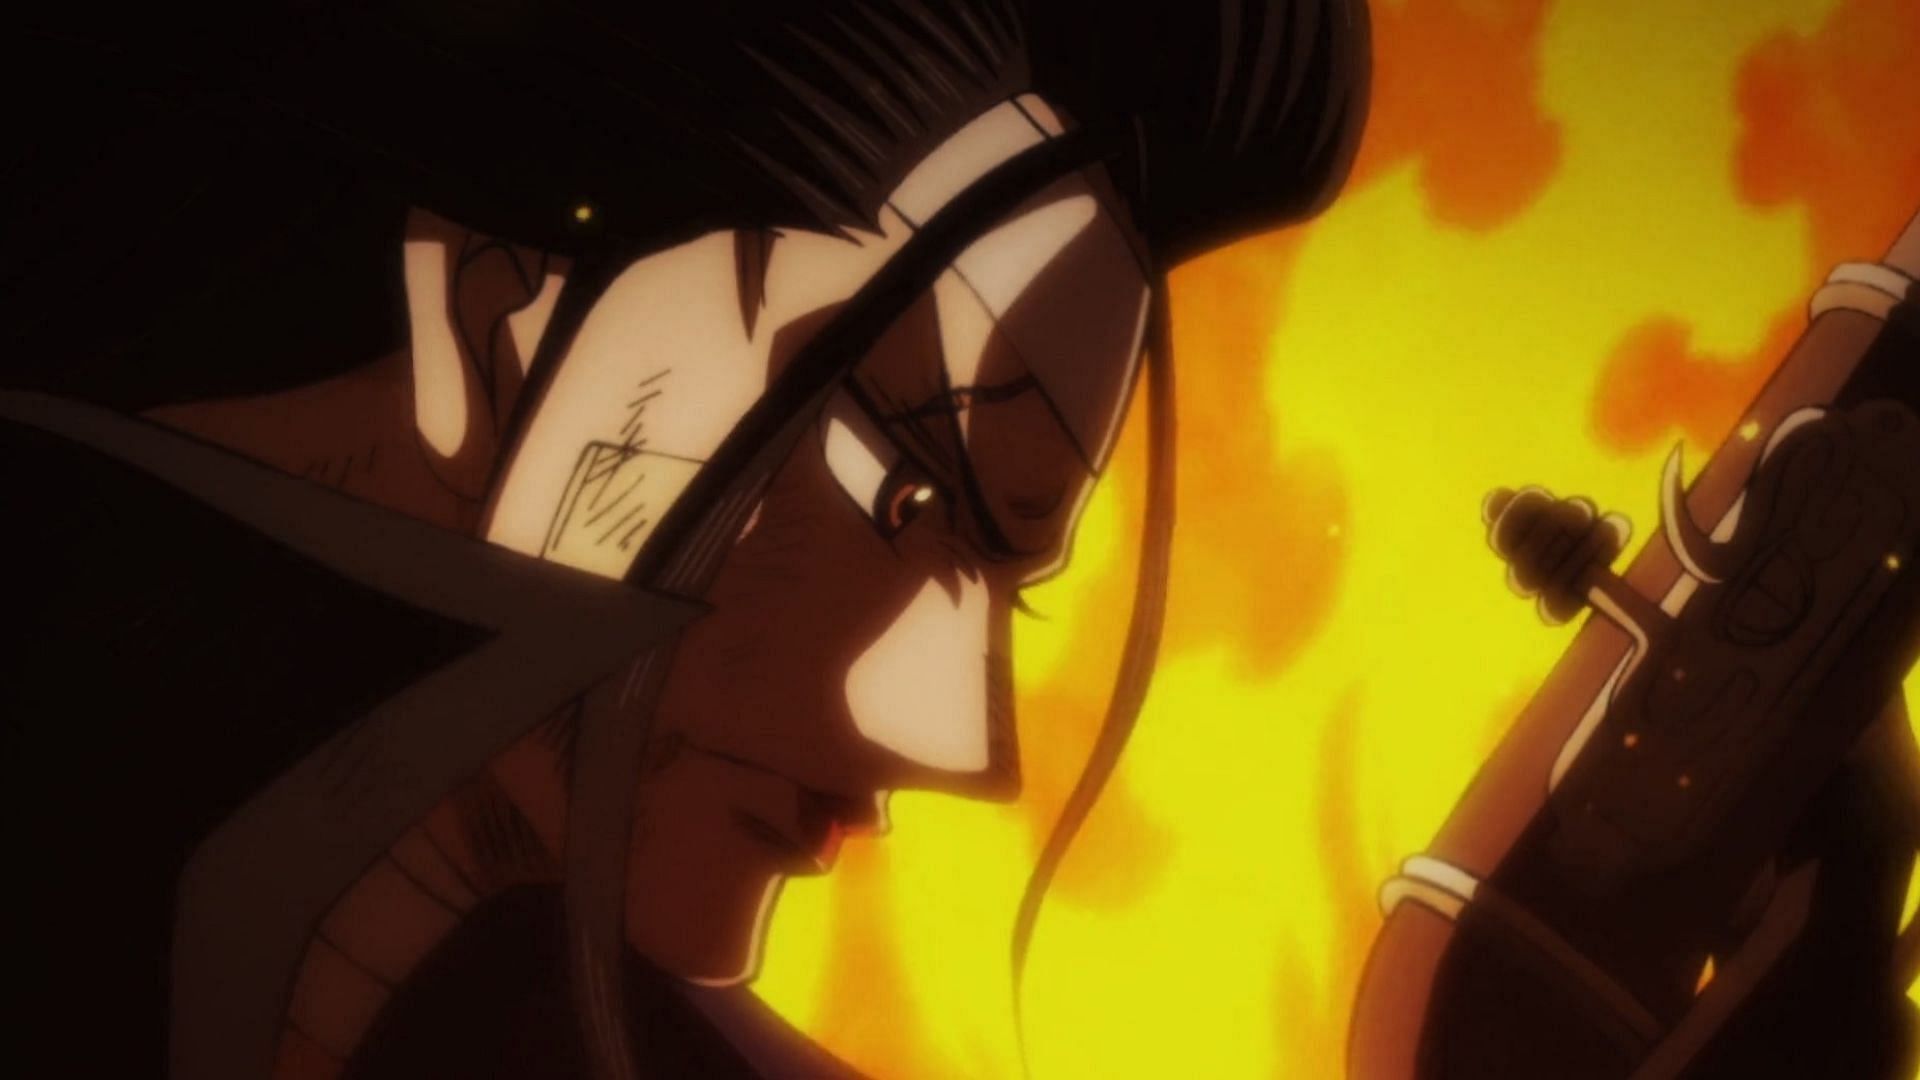 Izo makes a difficult decision in One Piece Episode 1065 (Image via Toei Animation)